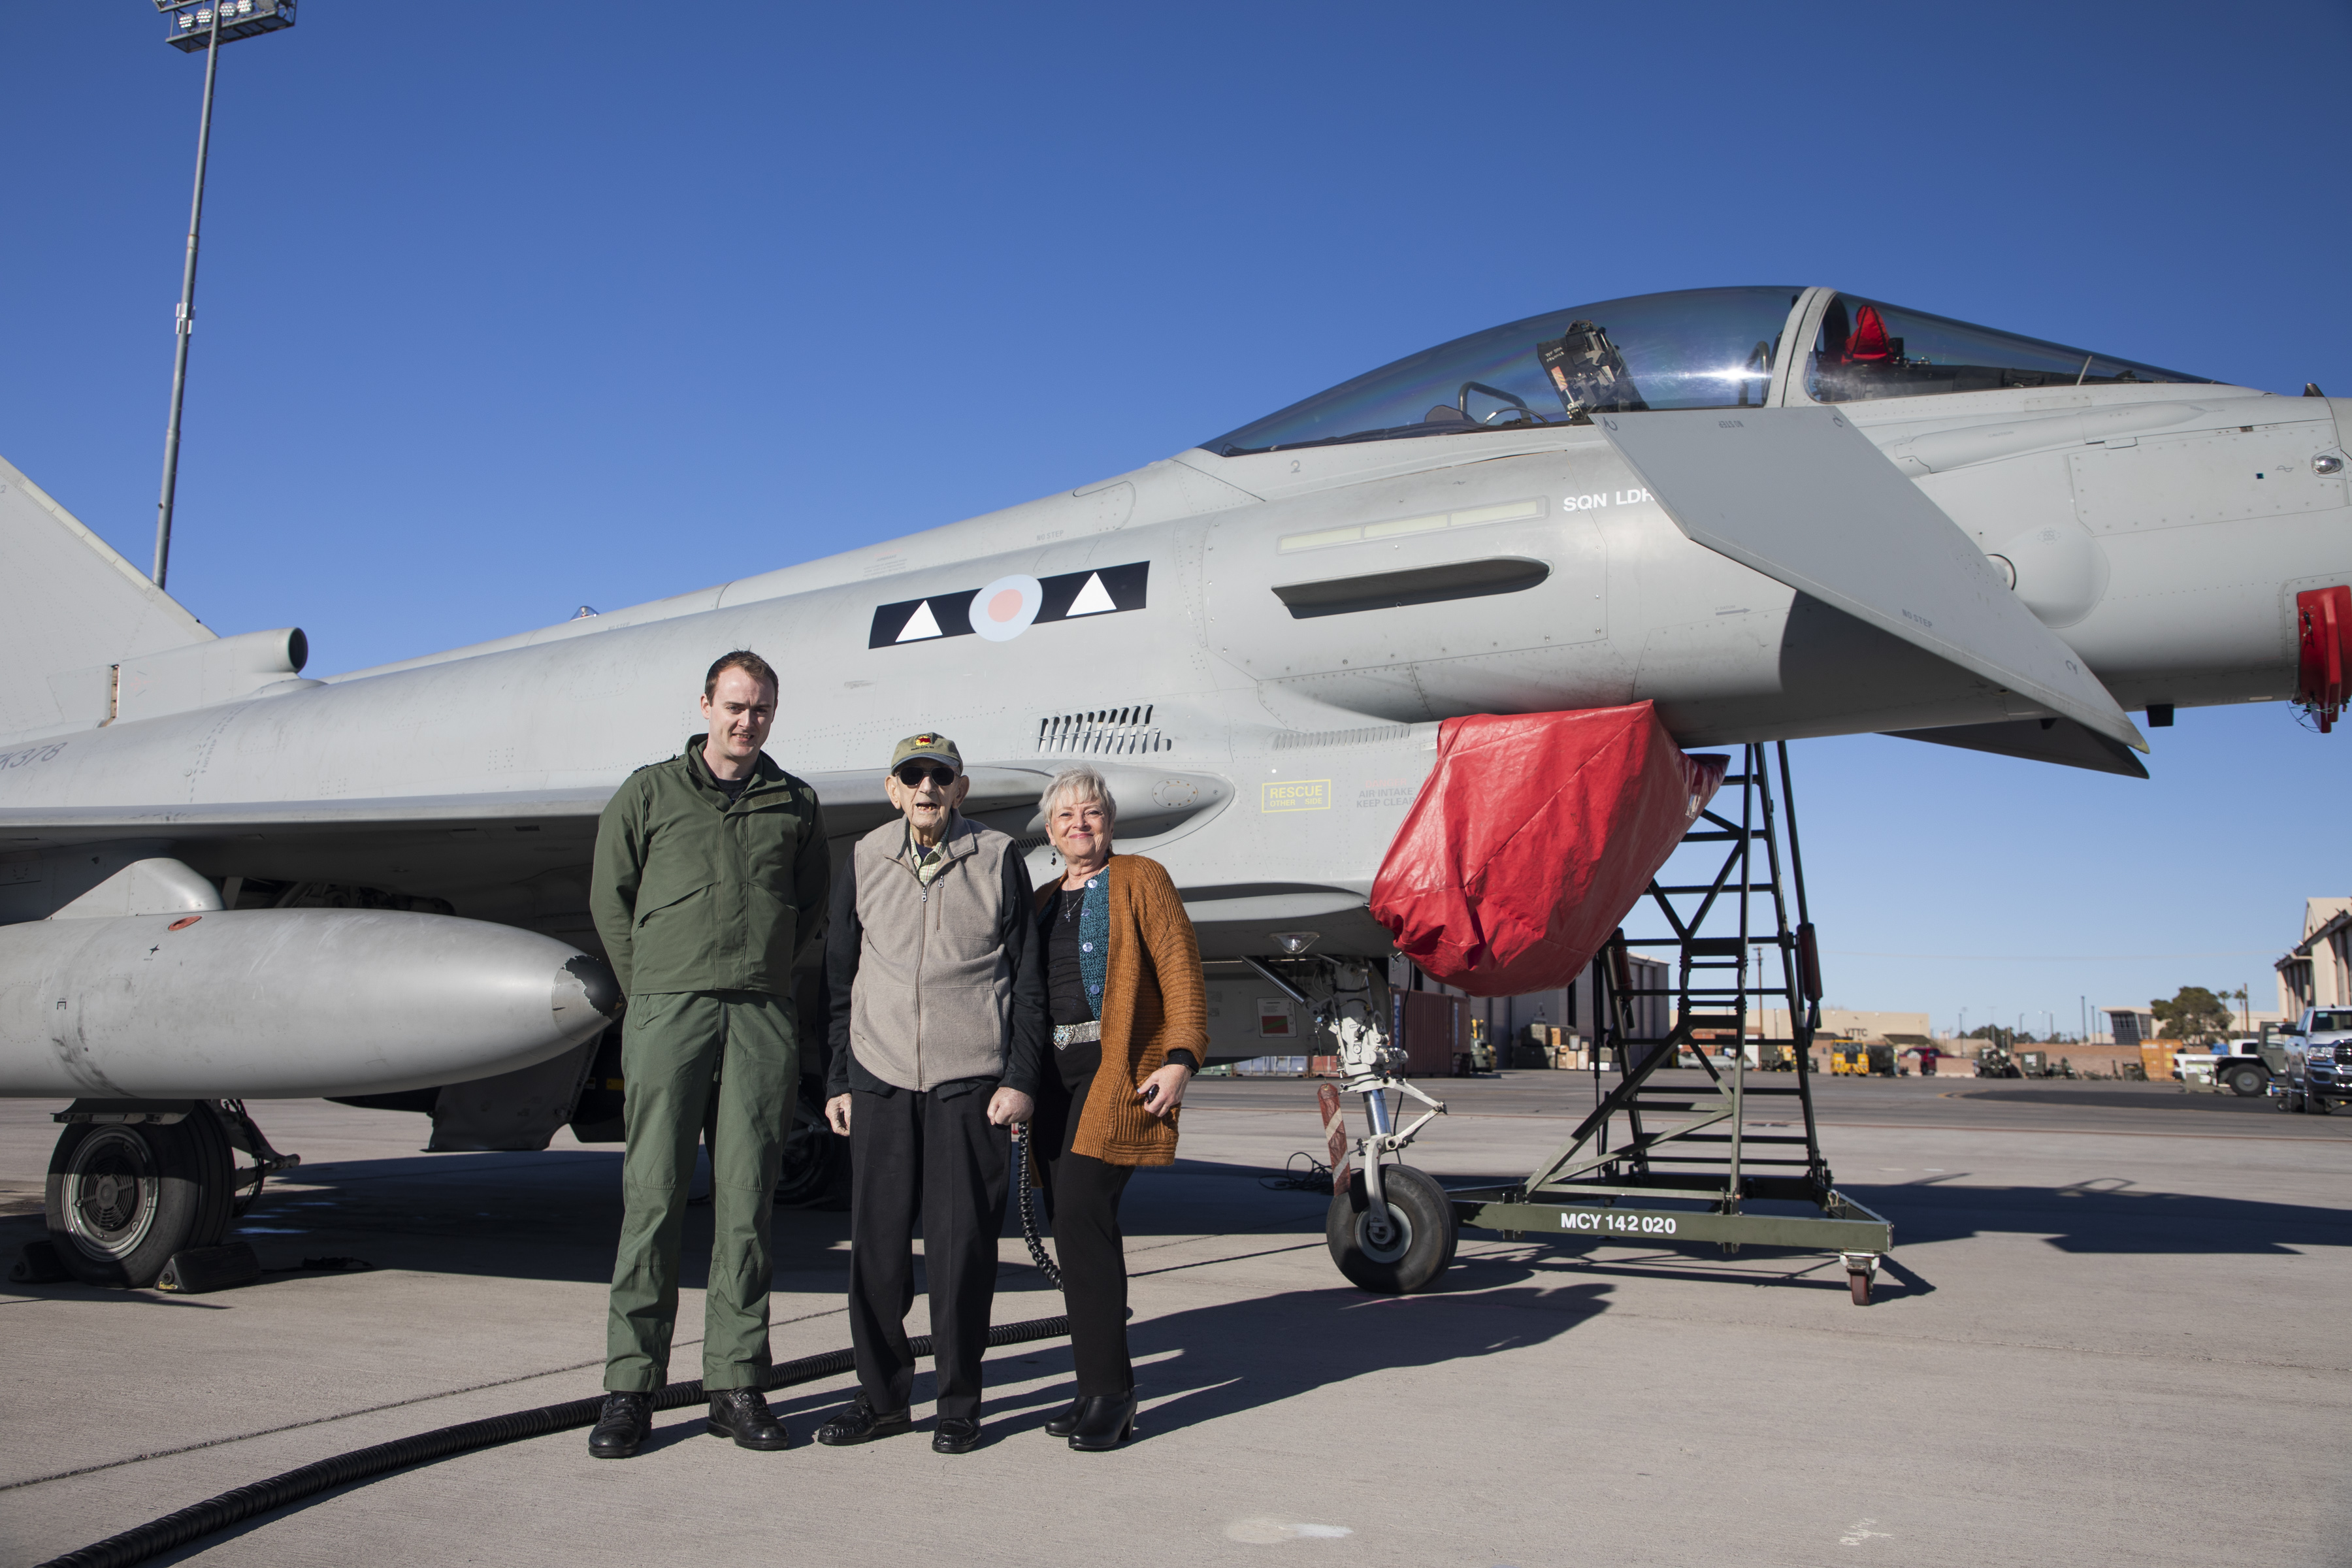 Image shows RAF Veteran with personnel and Typhoon aircraft on the airfield.